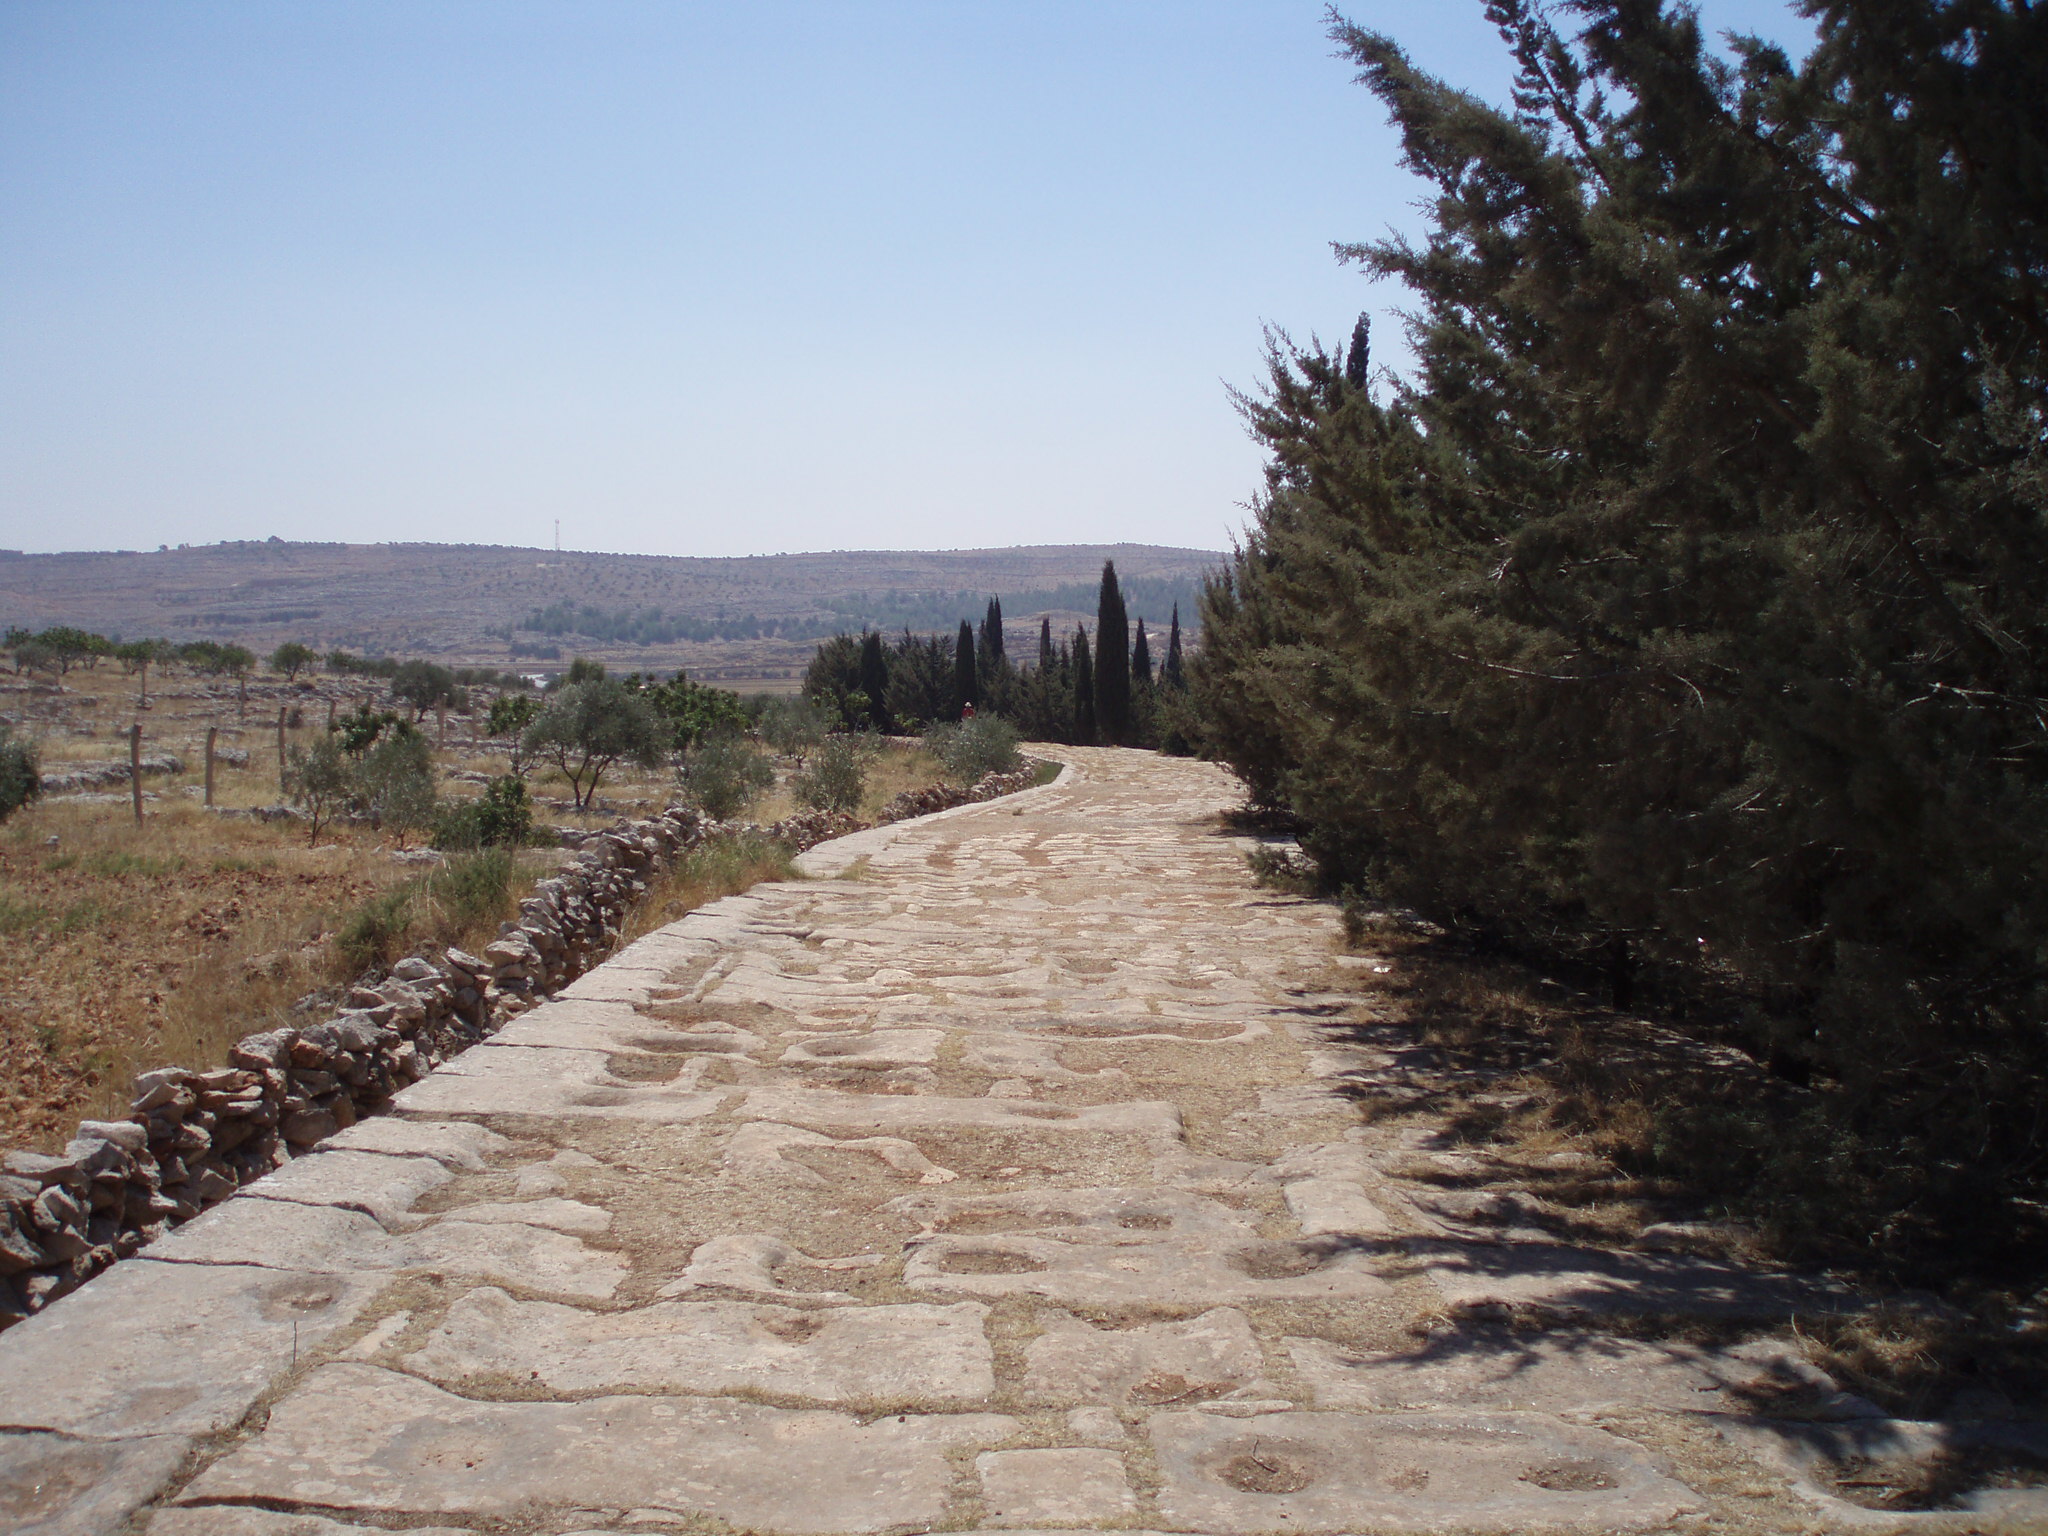 A stretch of paved Roman road still runs beside the main Aleppo-Turkey road, a testament to historic trade routes (Photo by: Diana Darke)